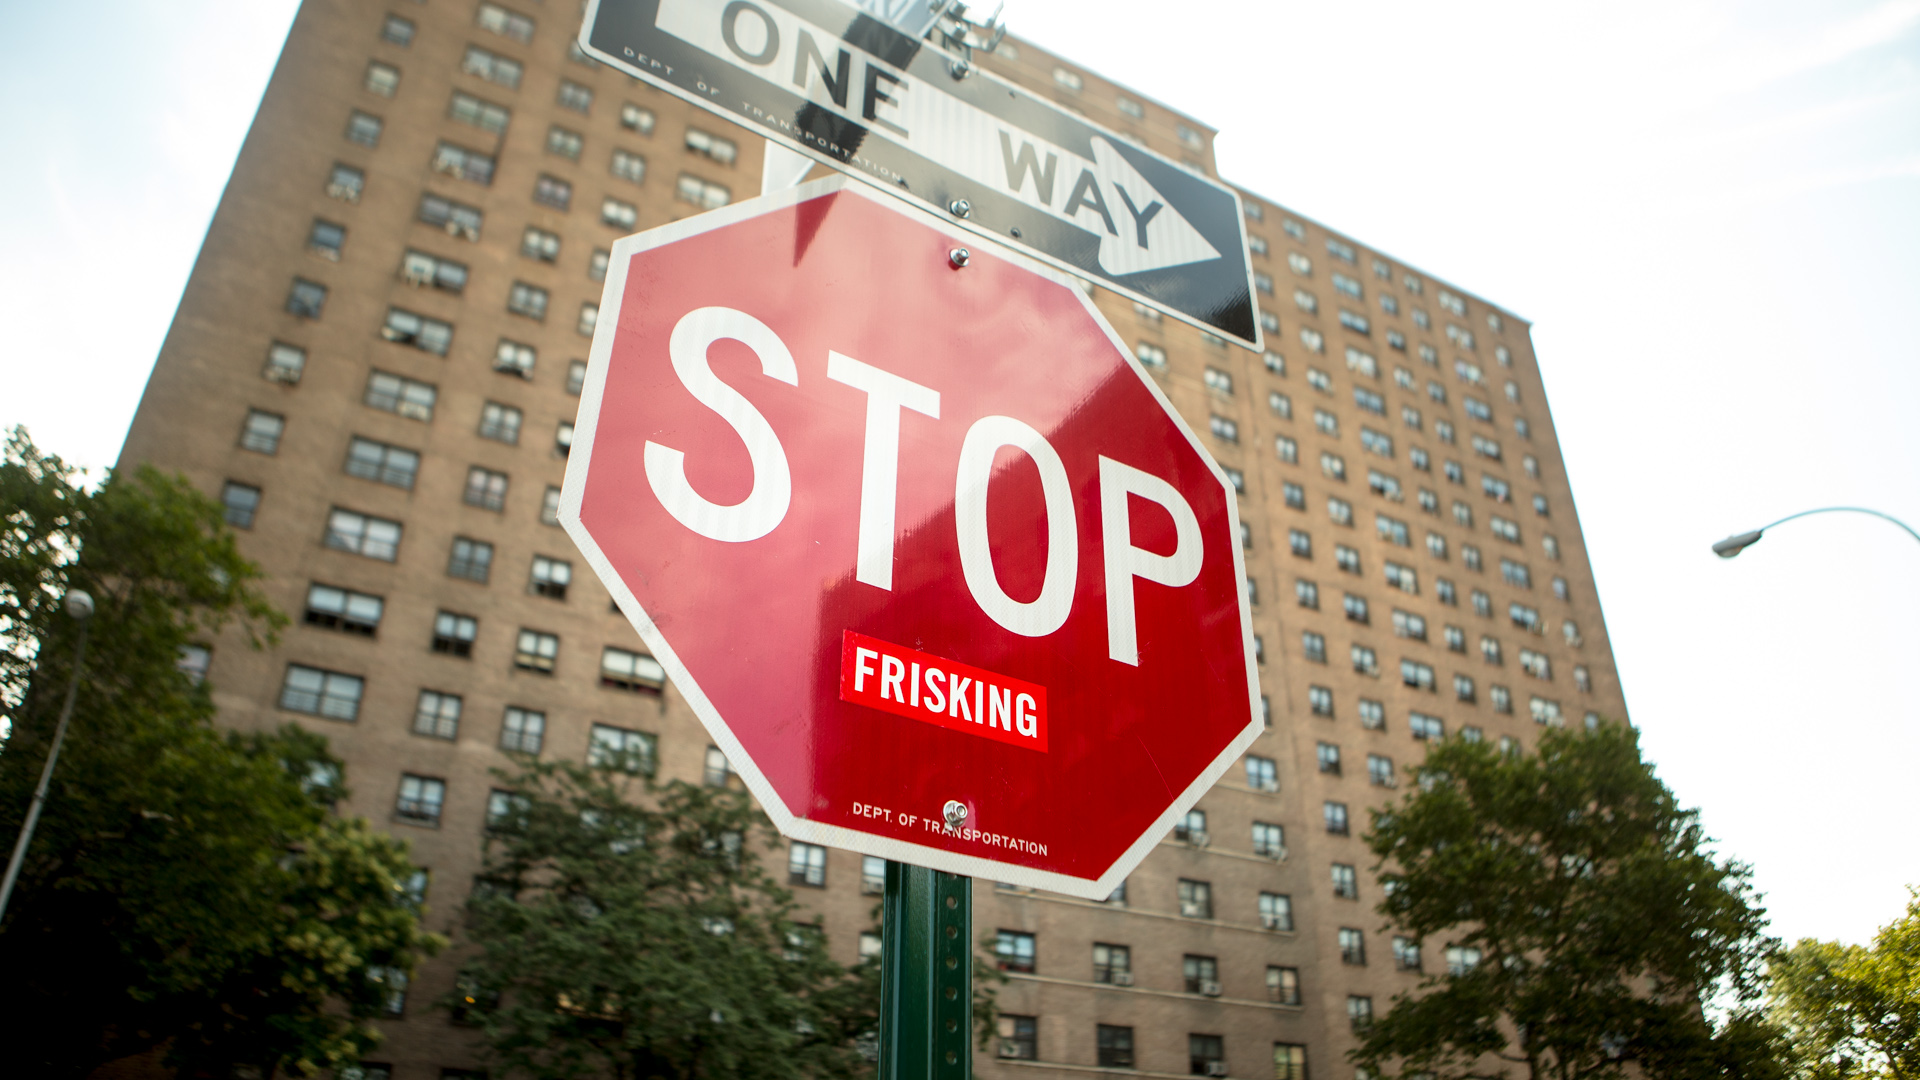 Stop Frisking by Jay Shells